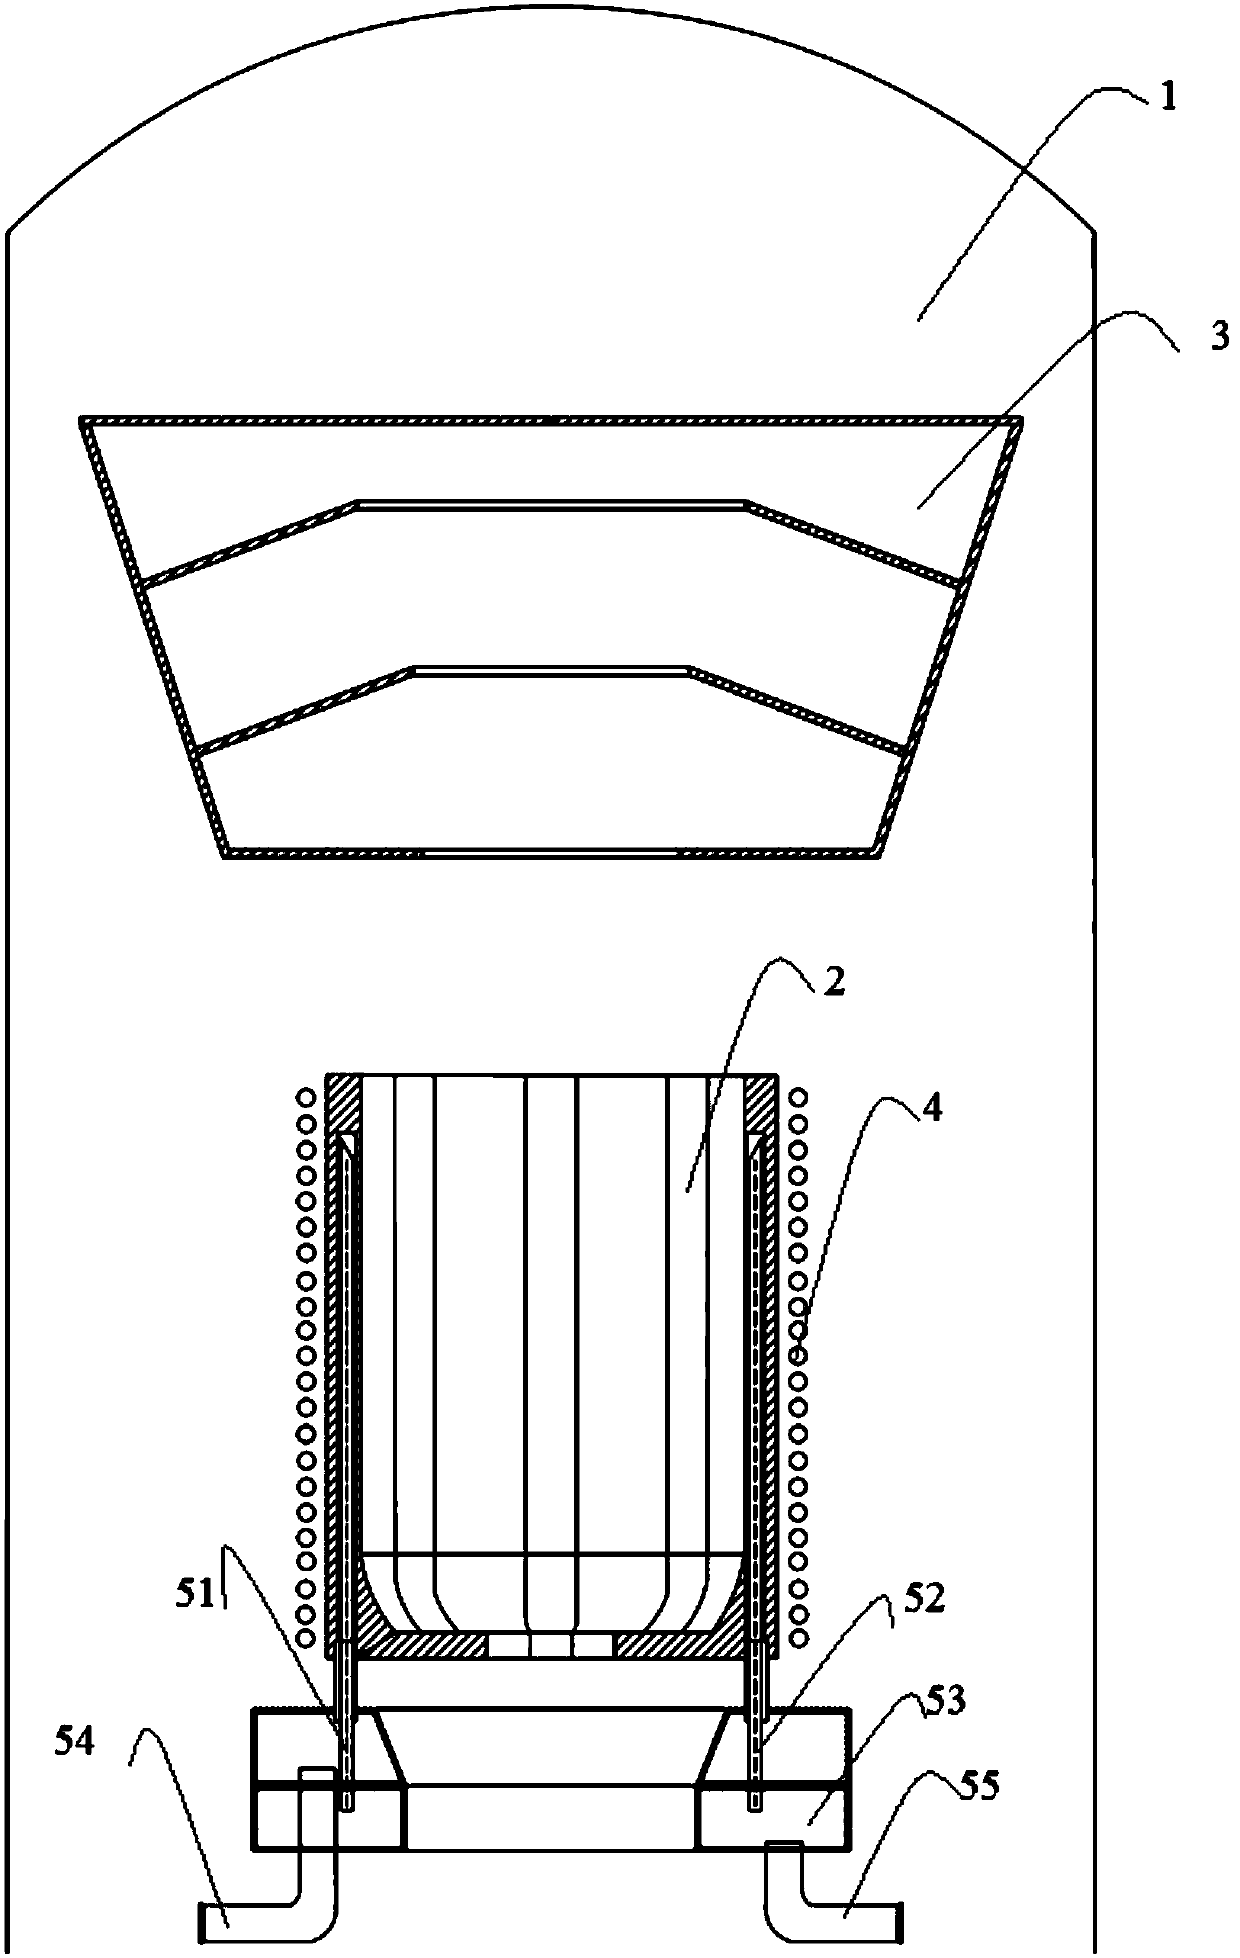 Method of Purifying Substances by Suspension Melting